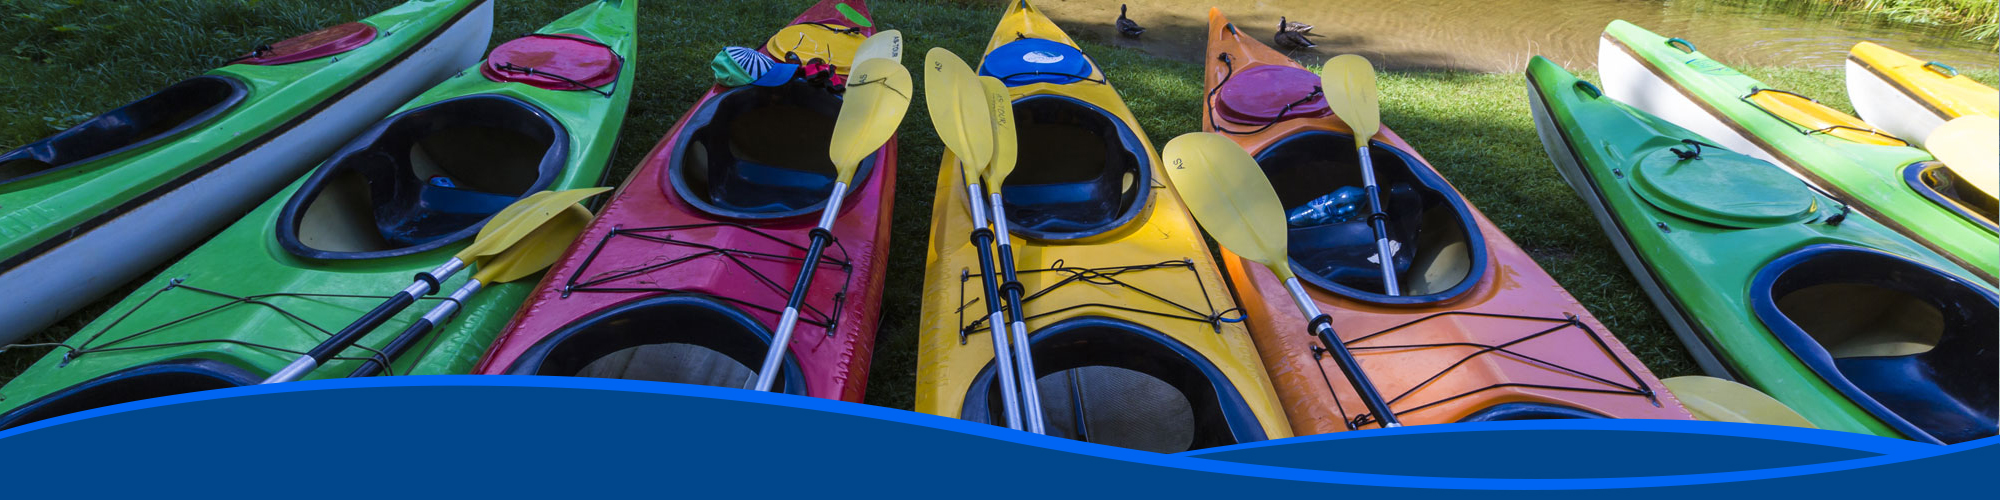 Kayaks for sale in Chiefland, Florida